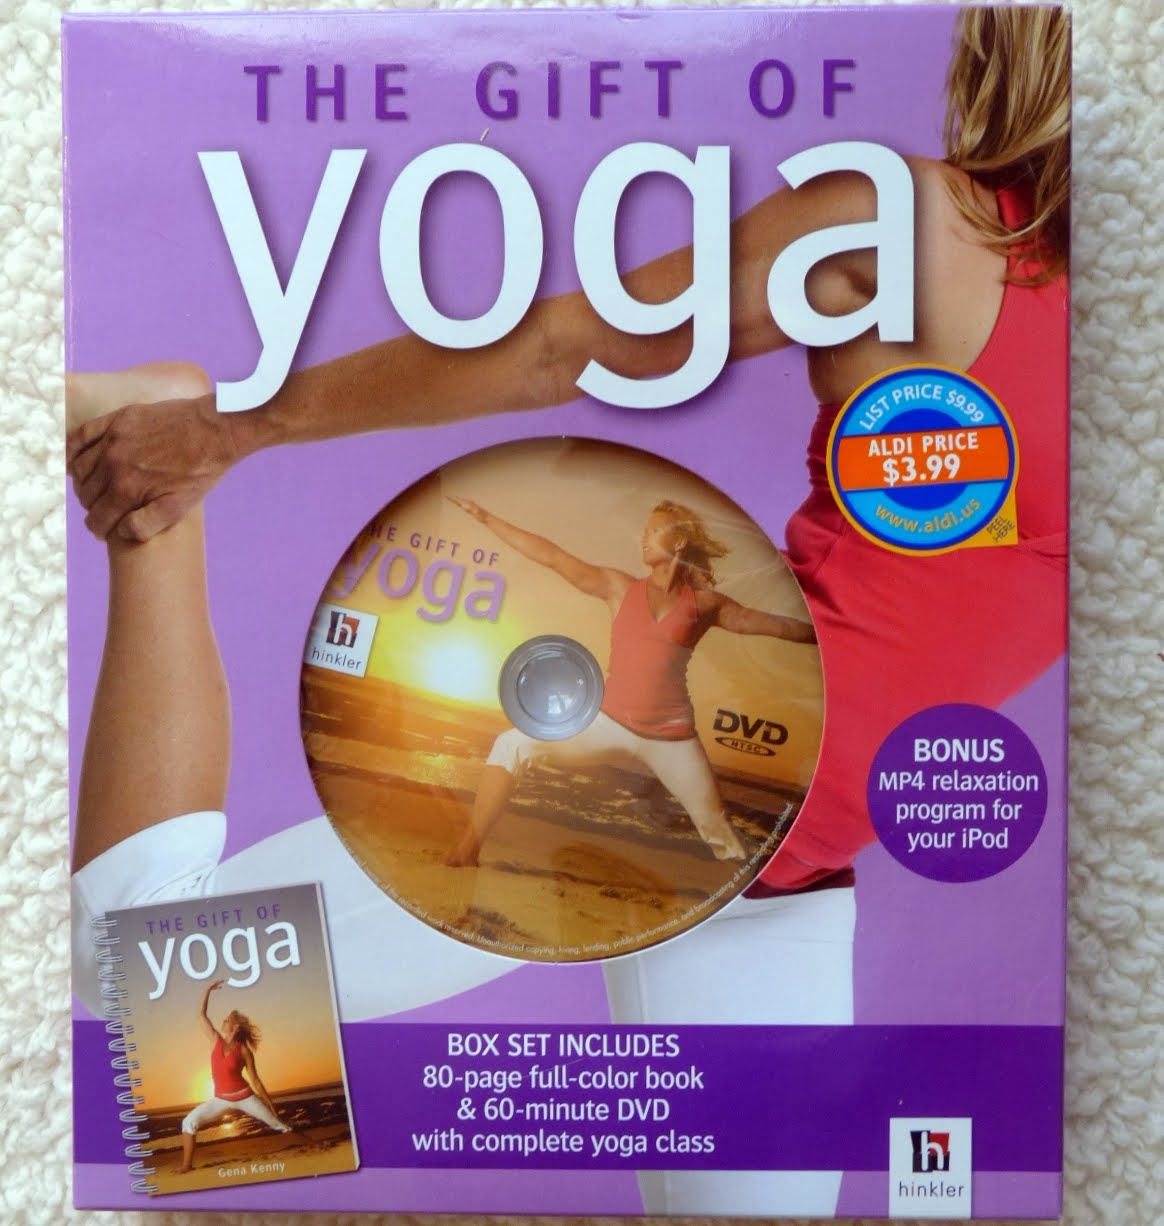 Aldi Product Reviews: The Gift of Yoga Boxed Instruction DVD and Book